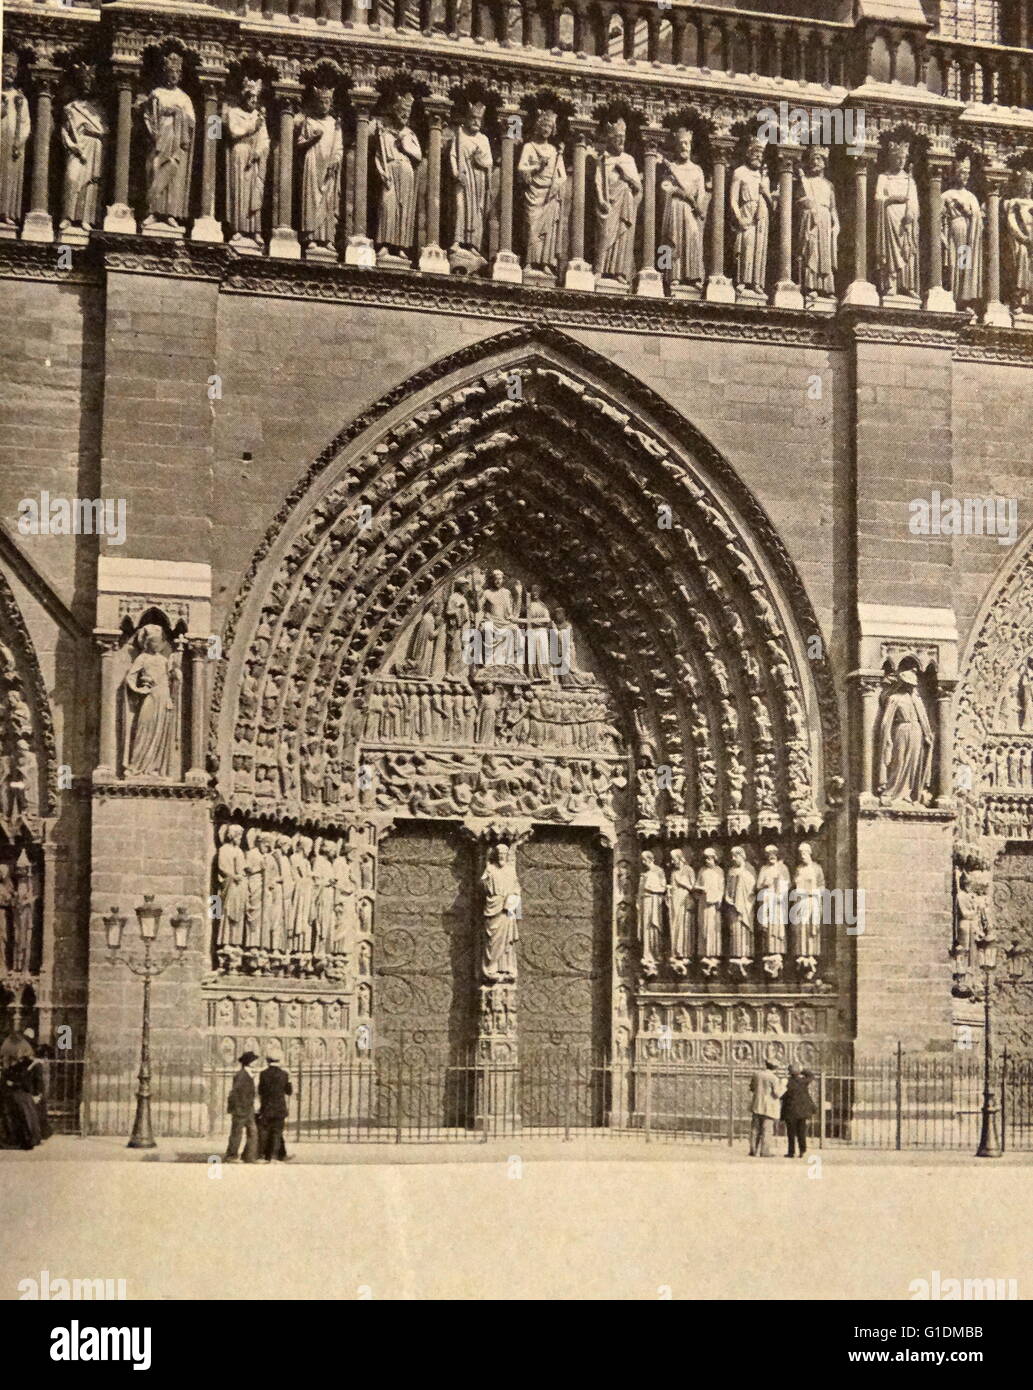 Photographic print of the central door and façade of the Cathedral of Notre-Dame, a historic Catholic cathedral on the eastern half of the Île de la Cité in the fourth arrondissement of Paris, France. Dated 19th Century Stock Photo